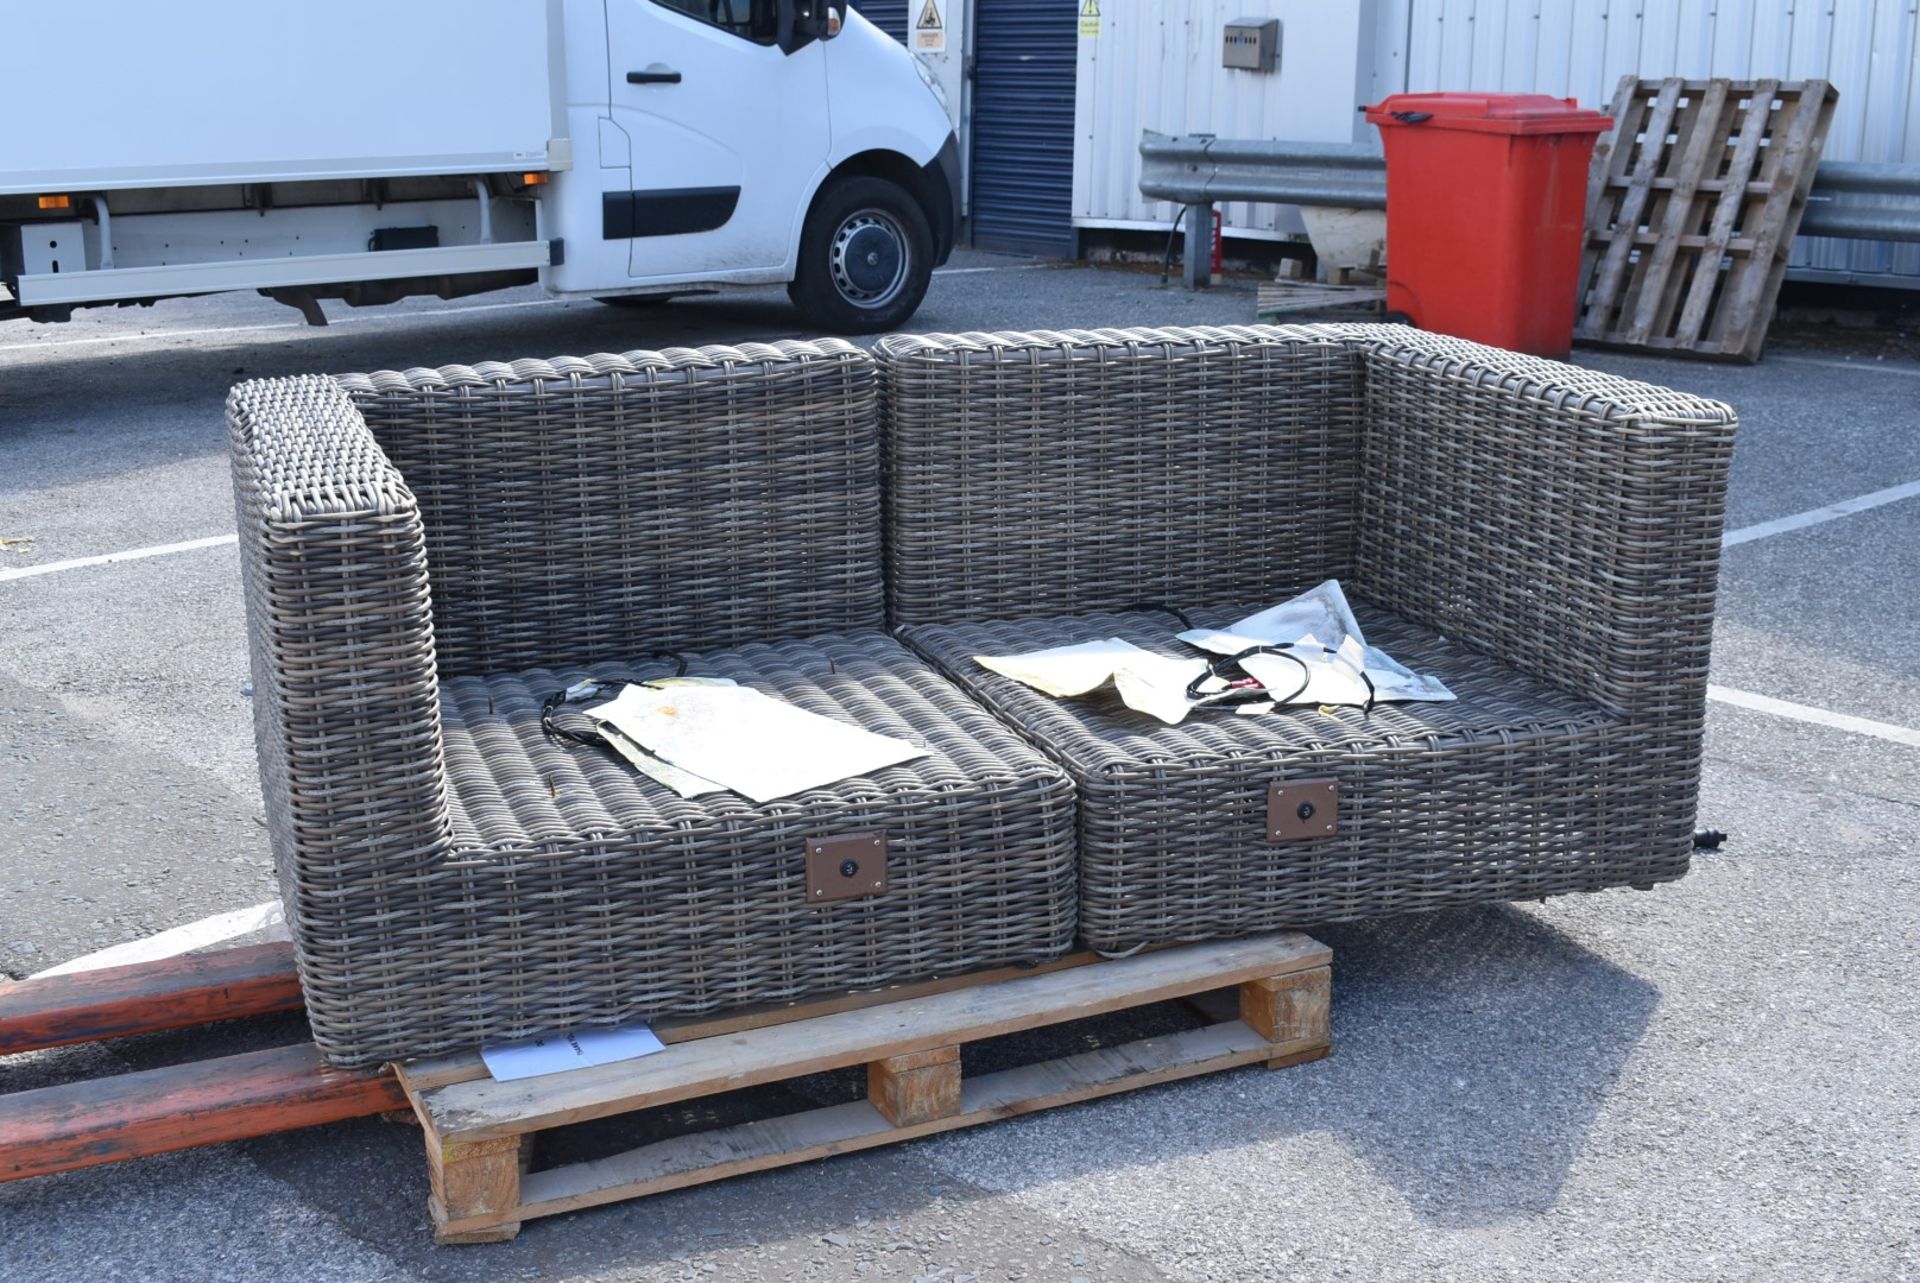 1 x Rattan Garden Furniture Sofa With Heated Seat Pads & Protector Cover - Cushions Not Included - Image 2 of 12